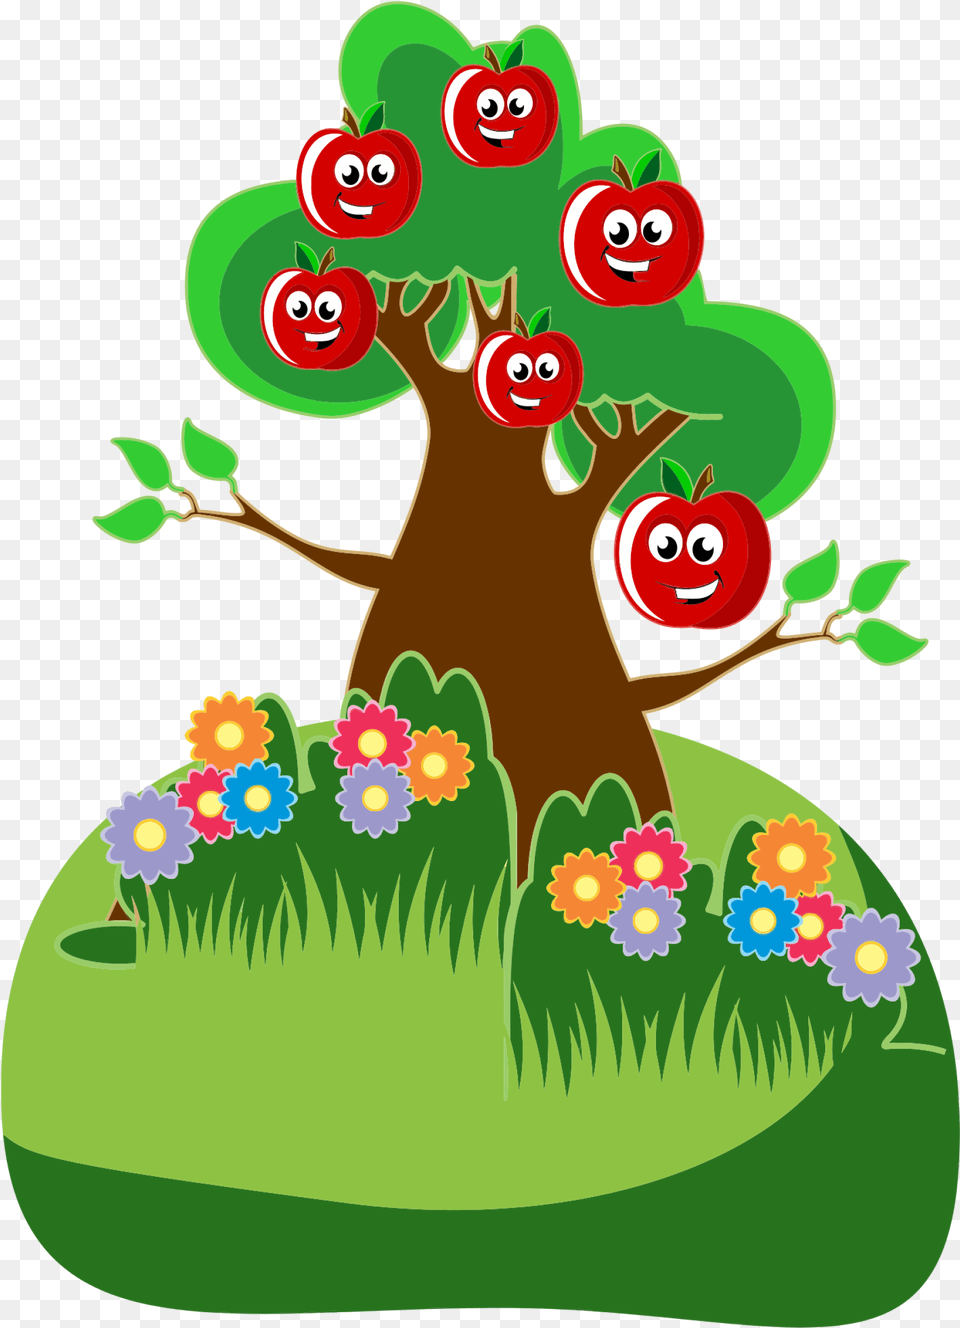 Apple Clip Arts For Web Clip Arts Free Backgrounds Apple Tree And Our Parents, Art, Green, Graphics, Plant Png